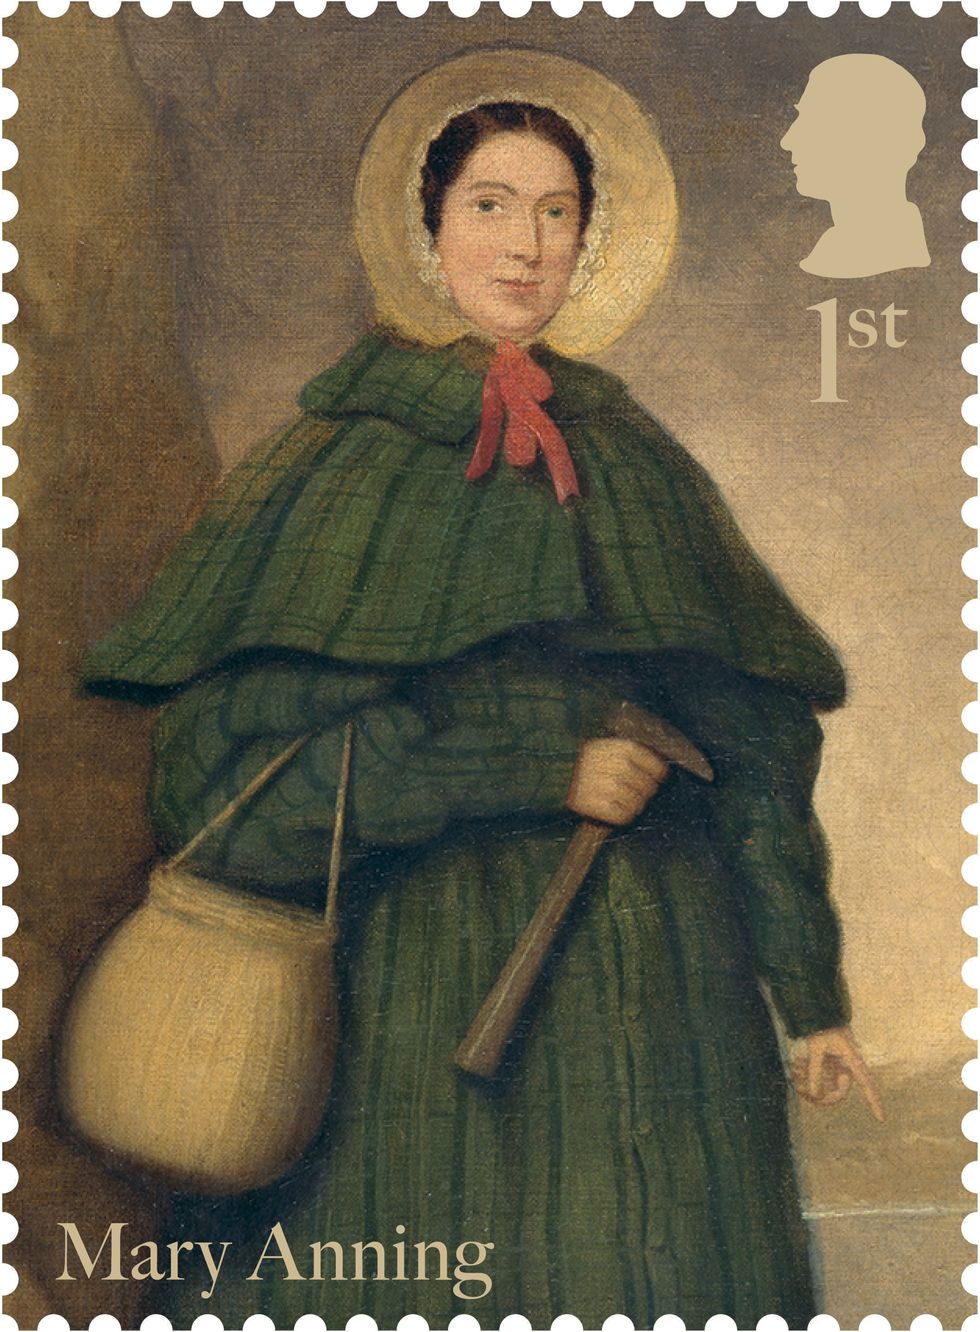 Fossil hunter Mary Anning celebrated on Royal Mail stamps